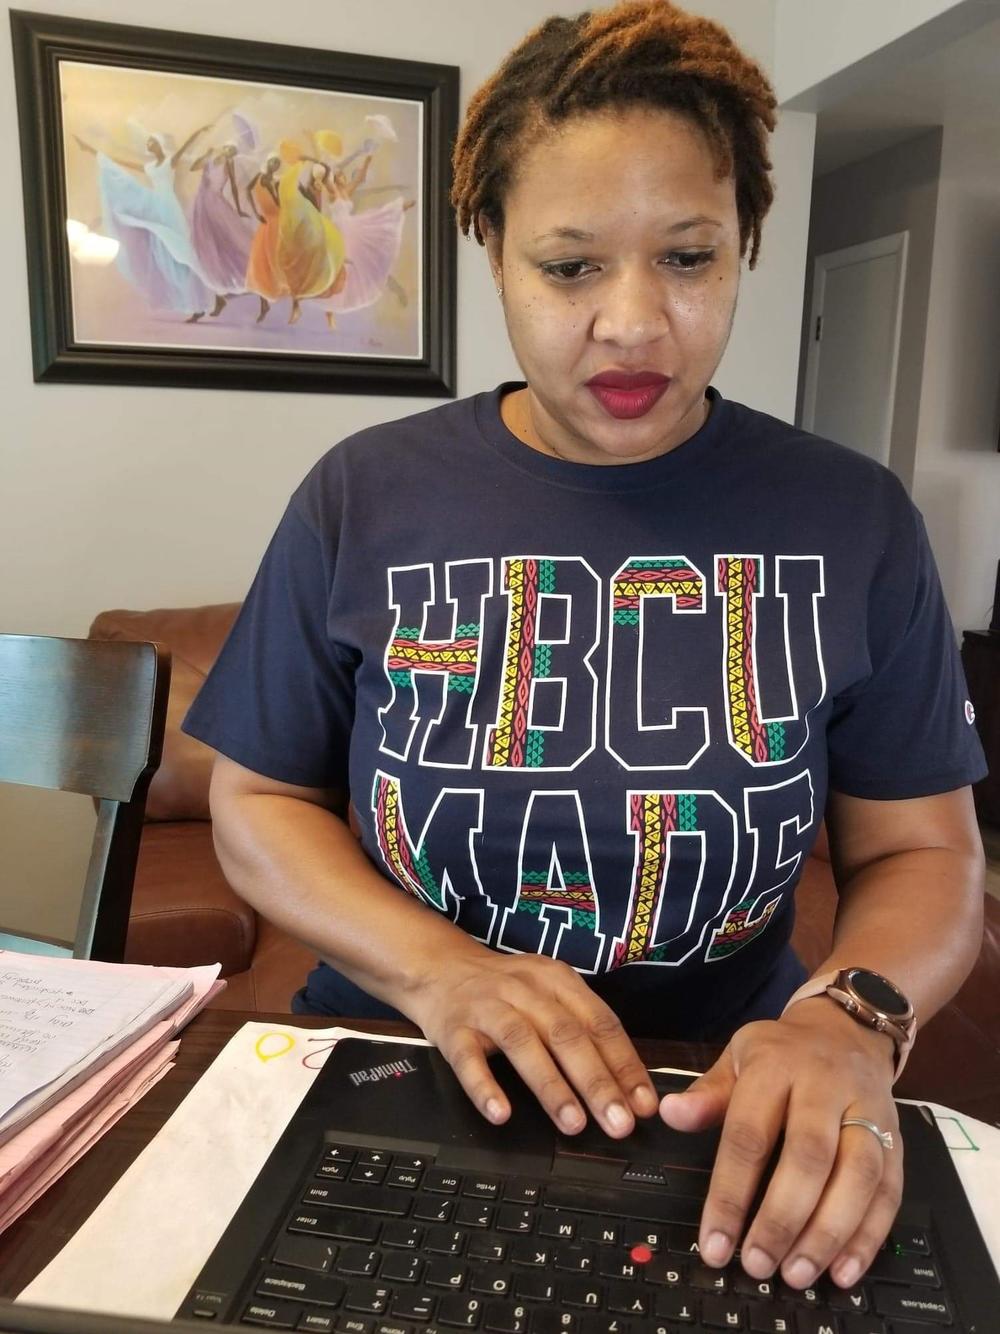 Breezi Hicks of Community Legal Services of Mid-Florida has been representing many renters facing eviction during the pandemic. She filed an emergency motion with the court that helped prevent Ambert and her family from being evicted, for now.